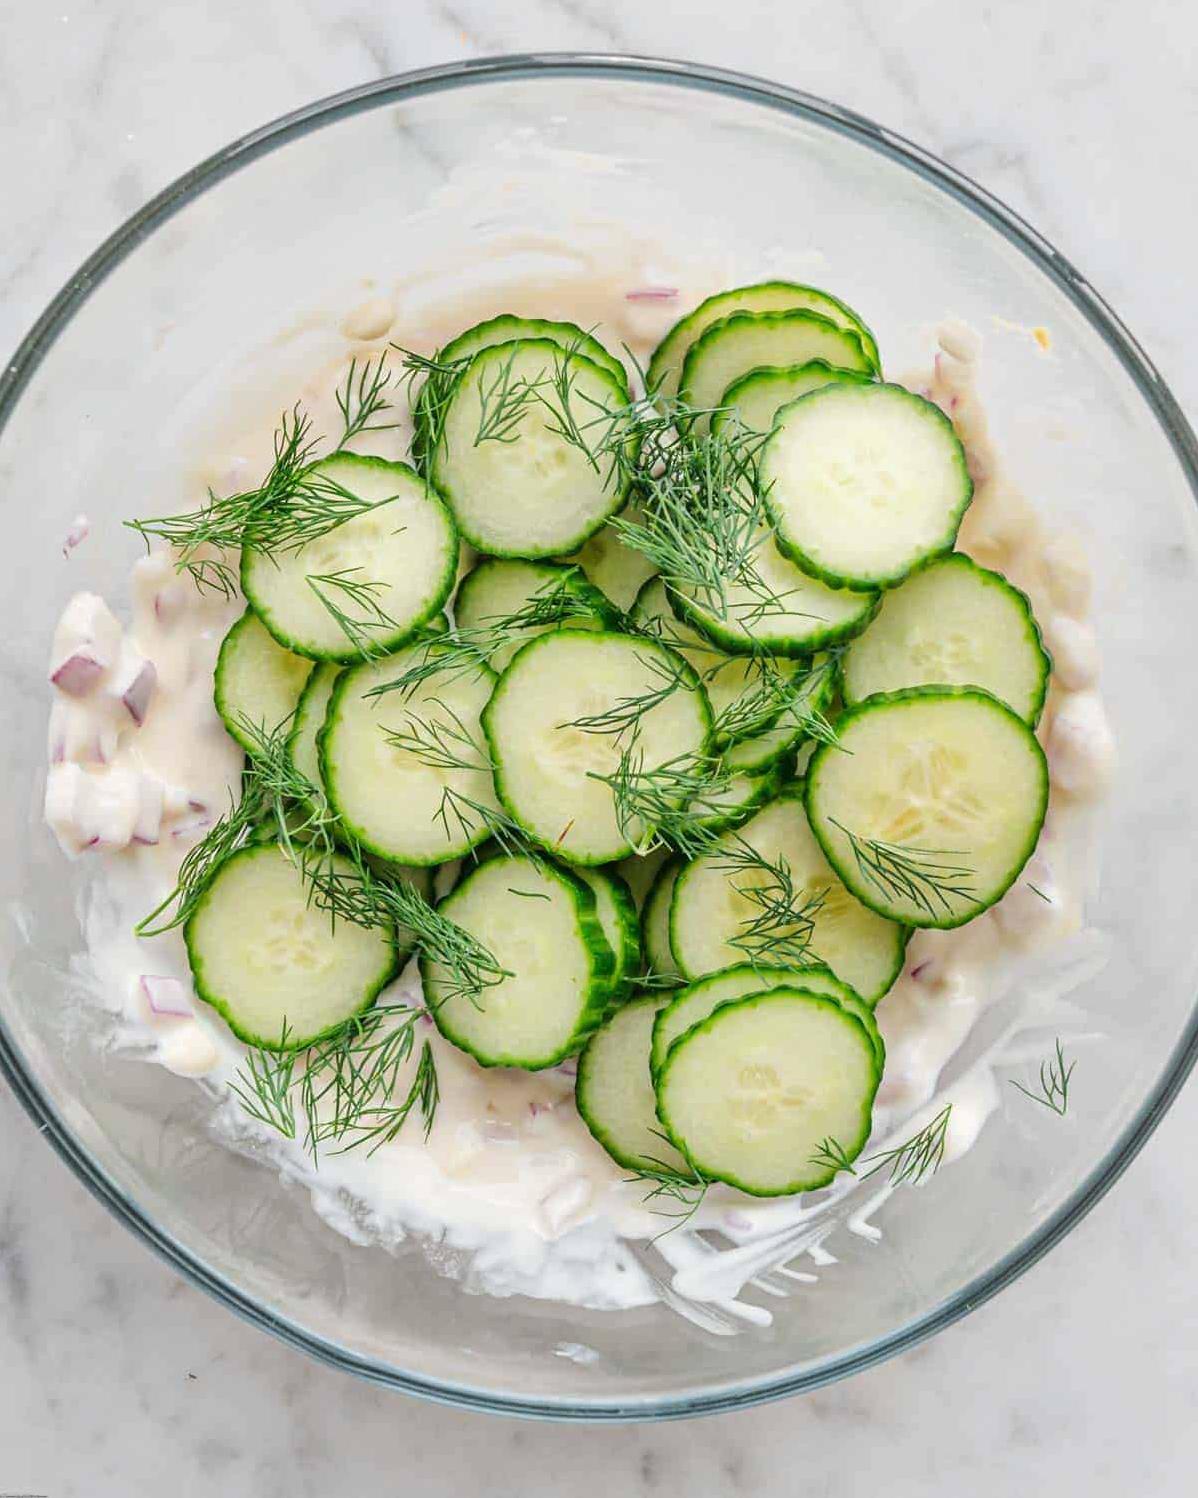  The tangy and sweet dressing perfectly complements the crisp cucumbers, creating a harmonious flavor combination.